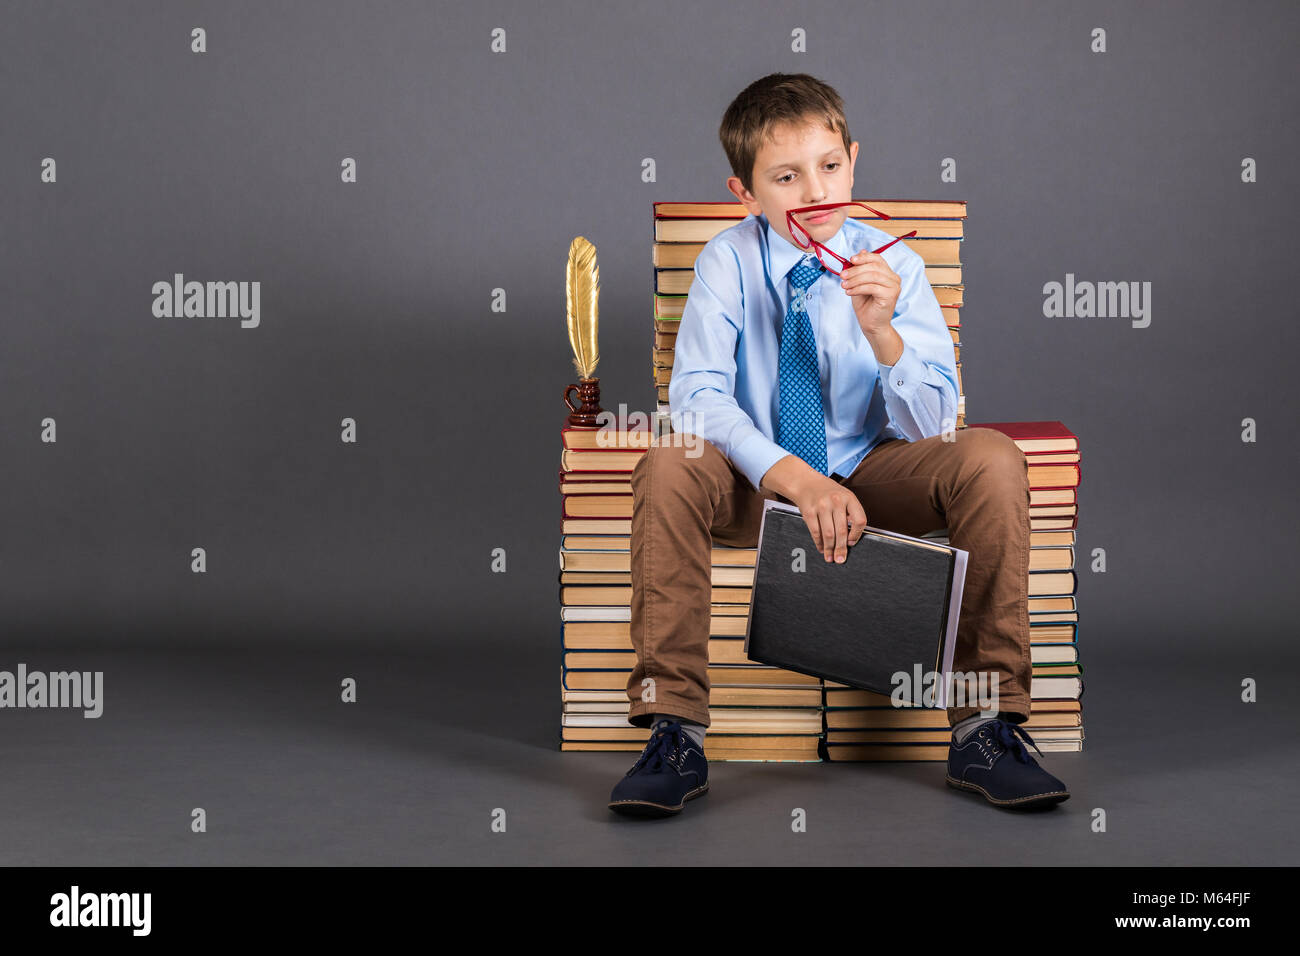 Education idea. A boy sitting on a throne from books plans his daily routine Stock Photo